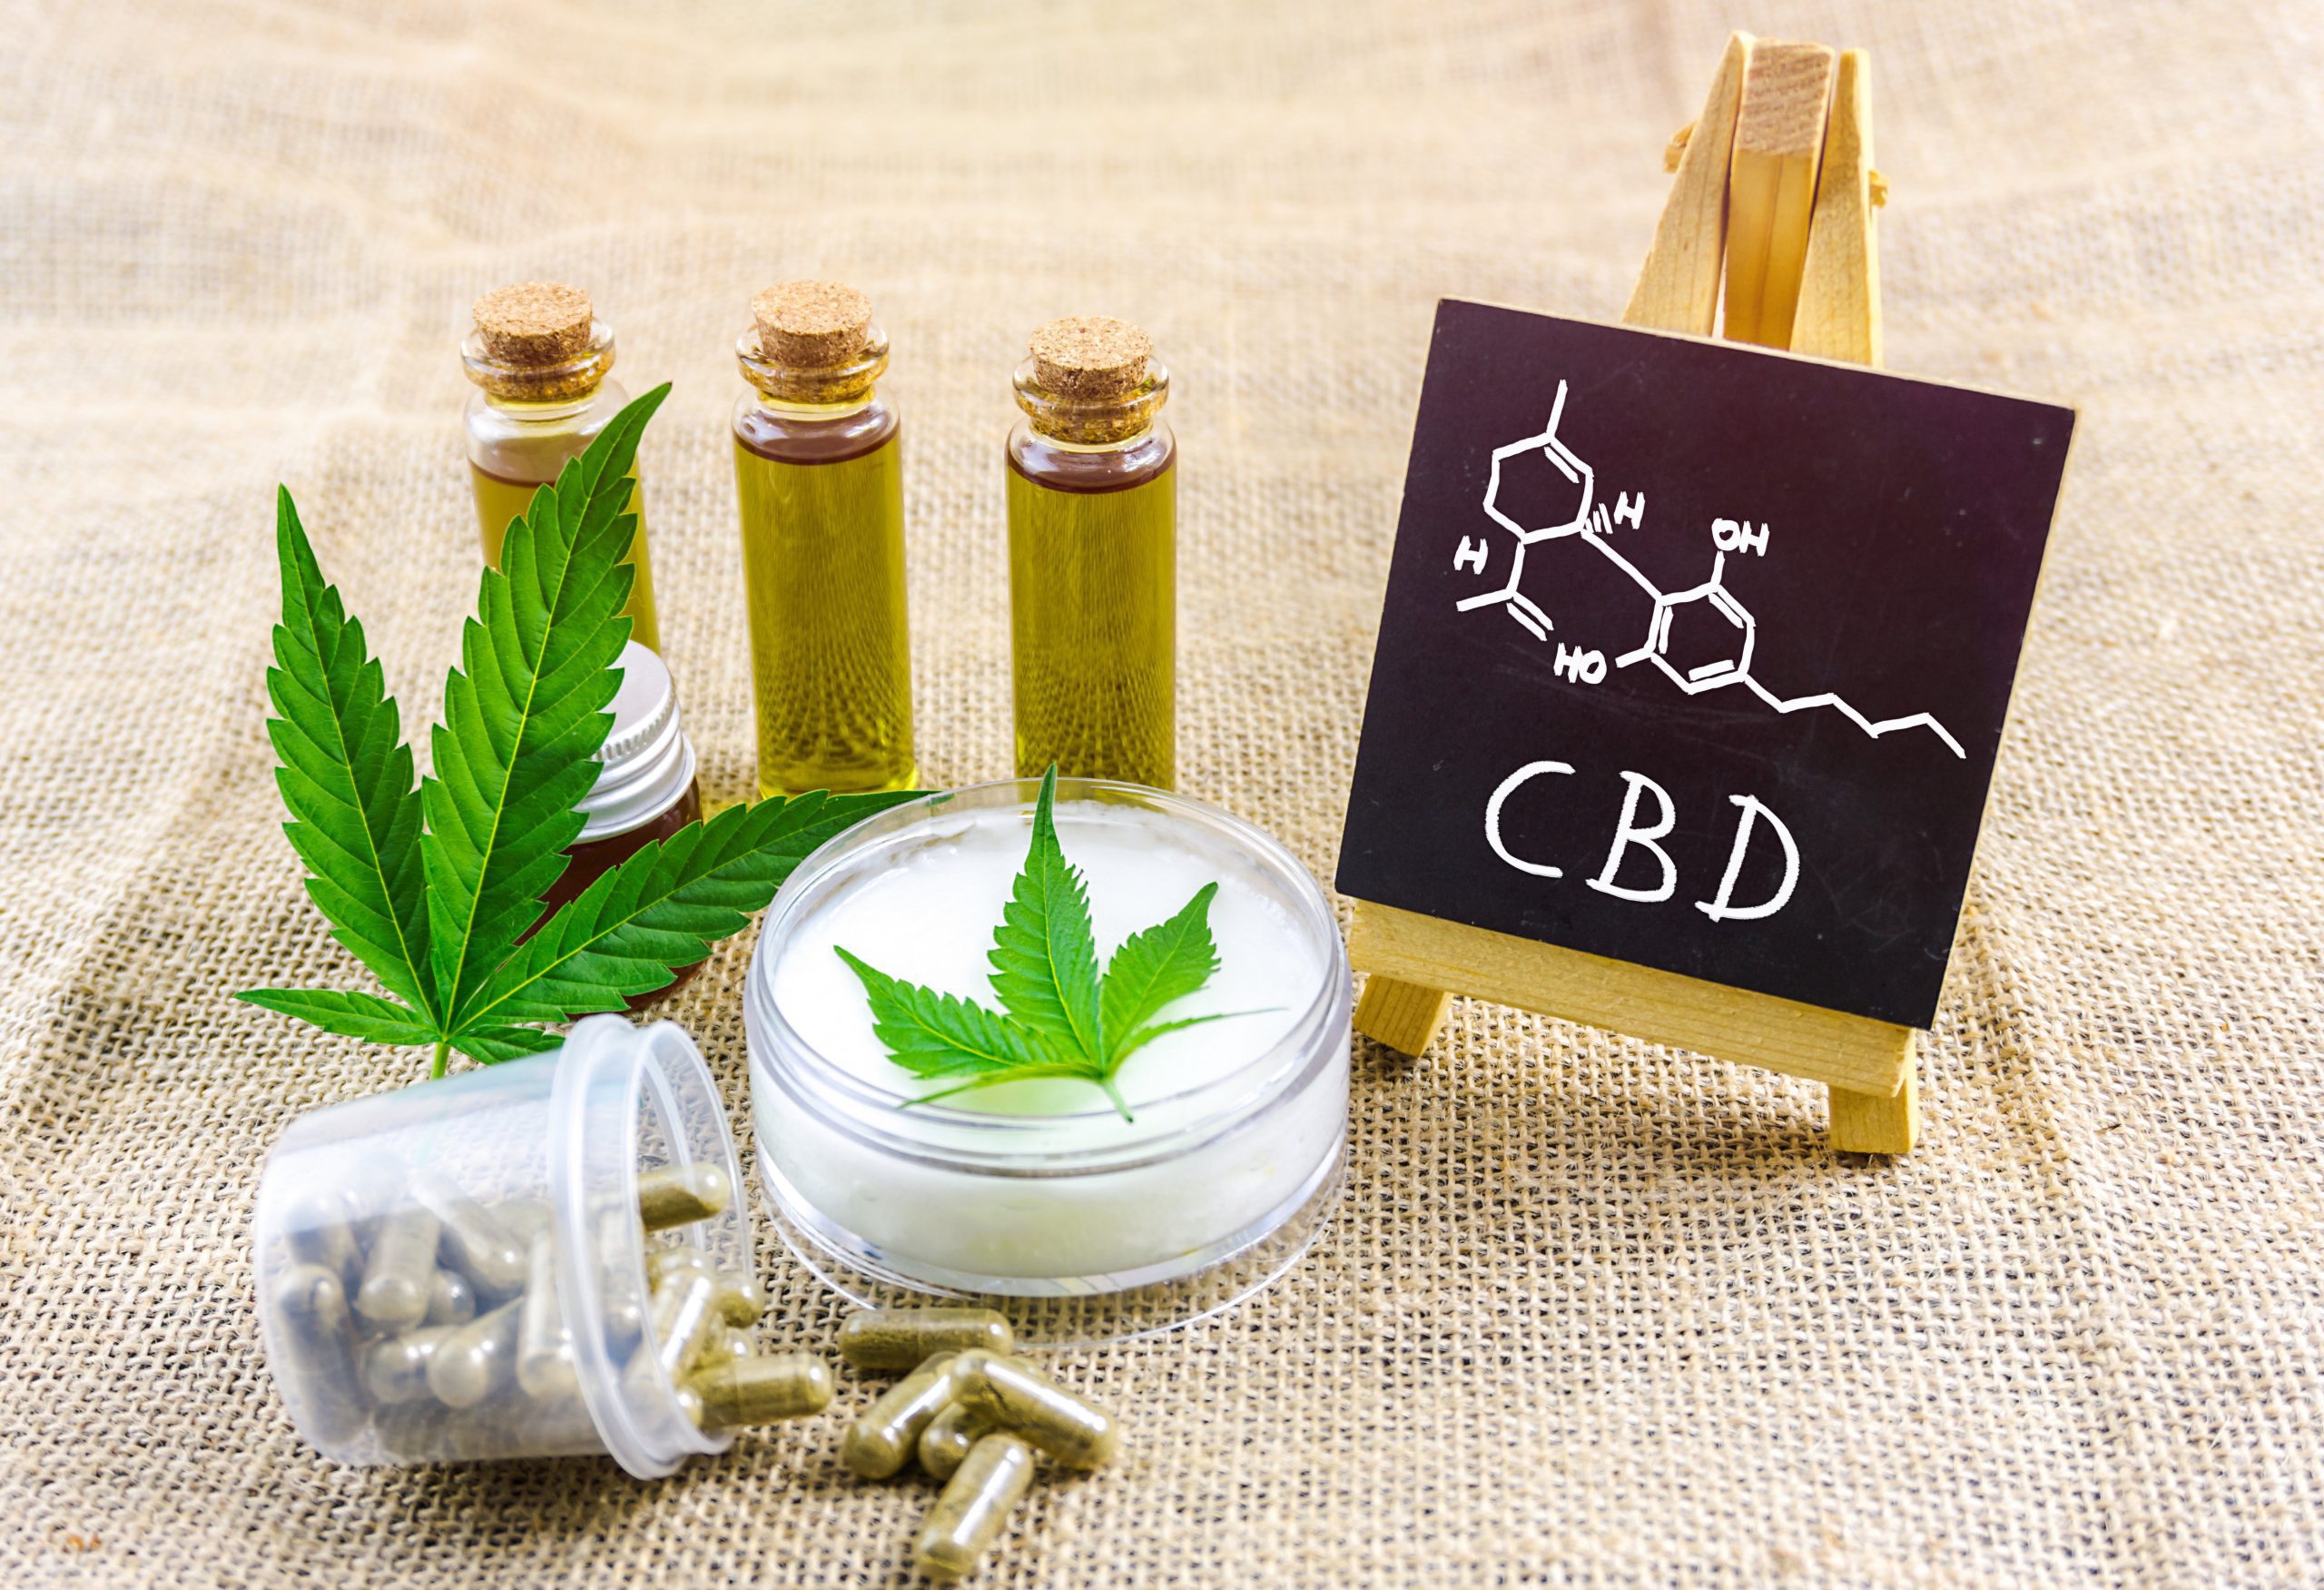 what does CBD stand for